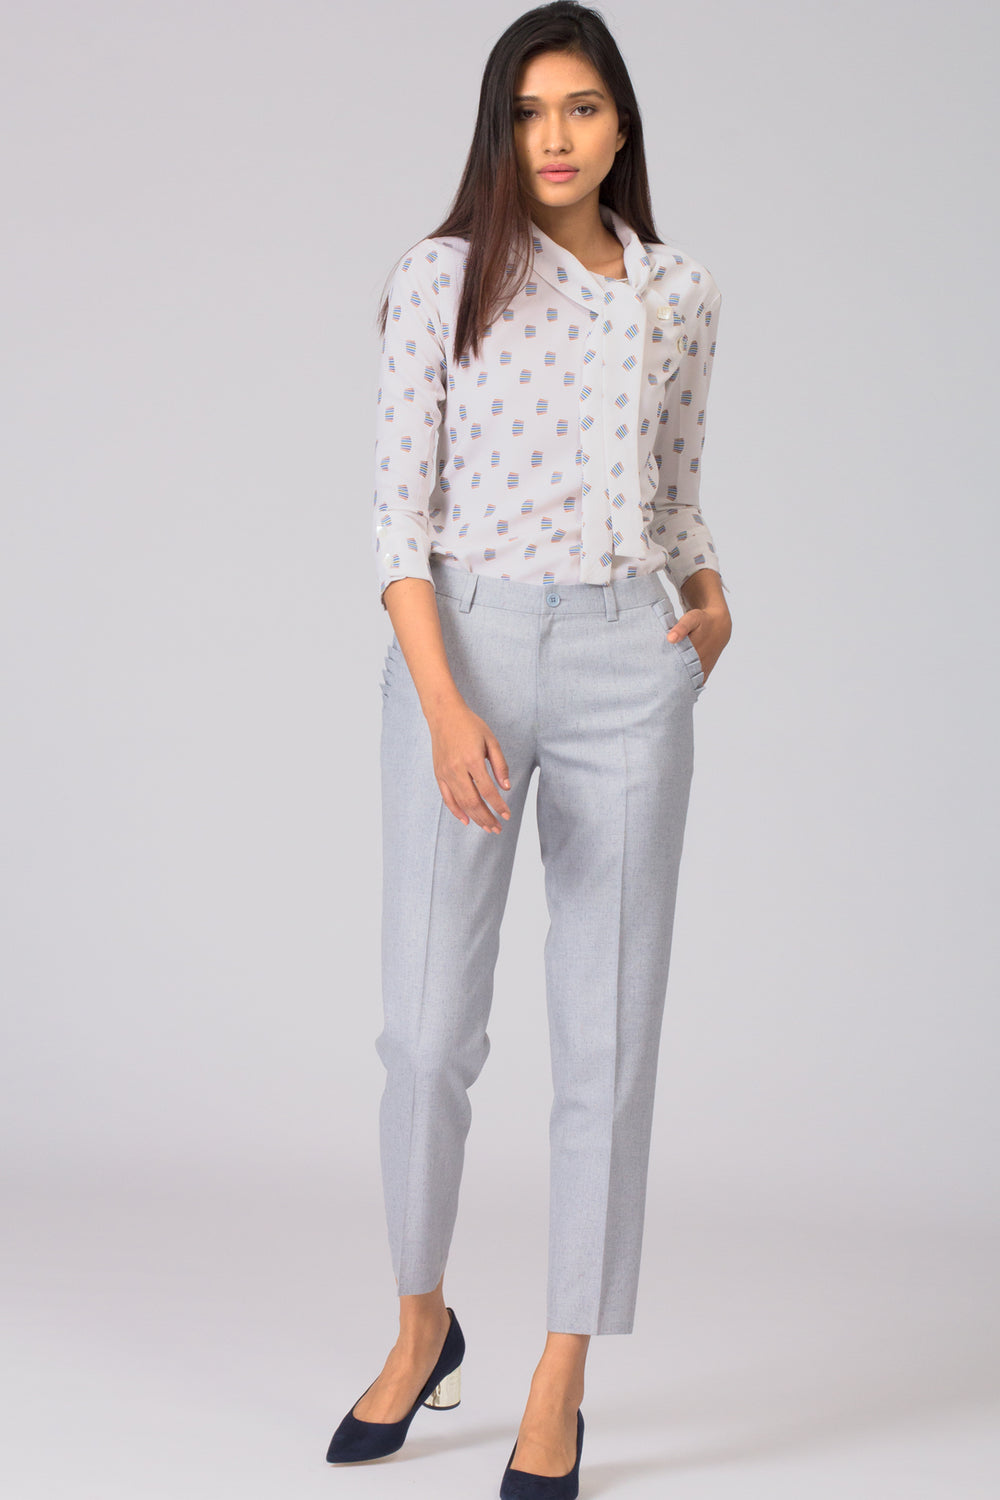 Smart and stylish women's formal pants and trousers for office. Shop online for all sizes including plus size formal trousers and pants at www.intermod.in